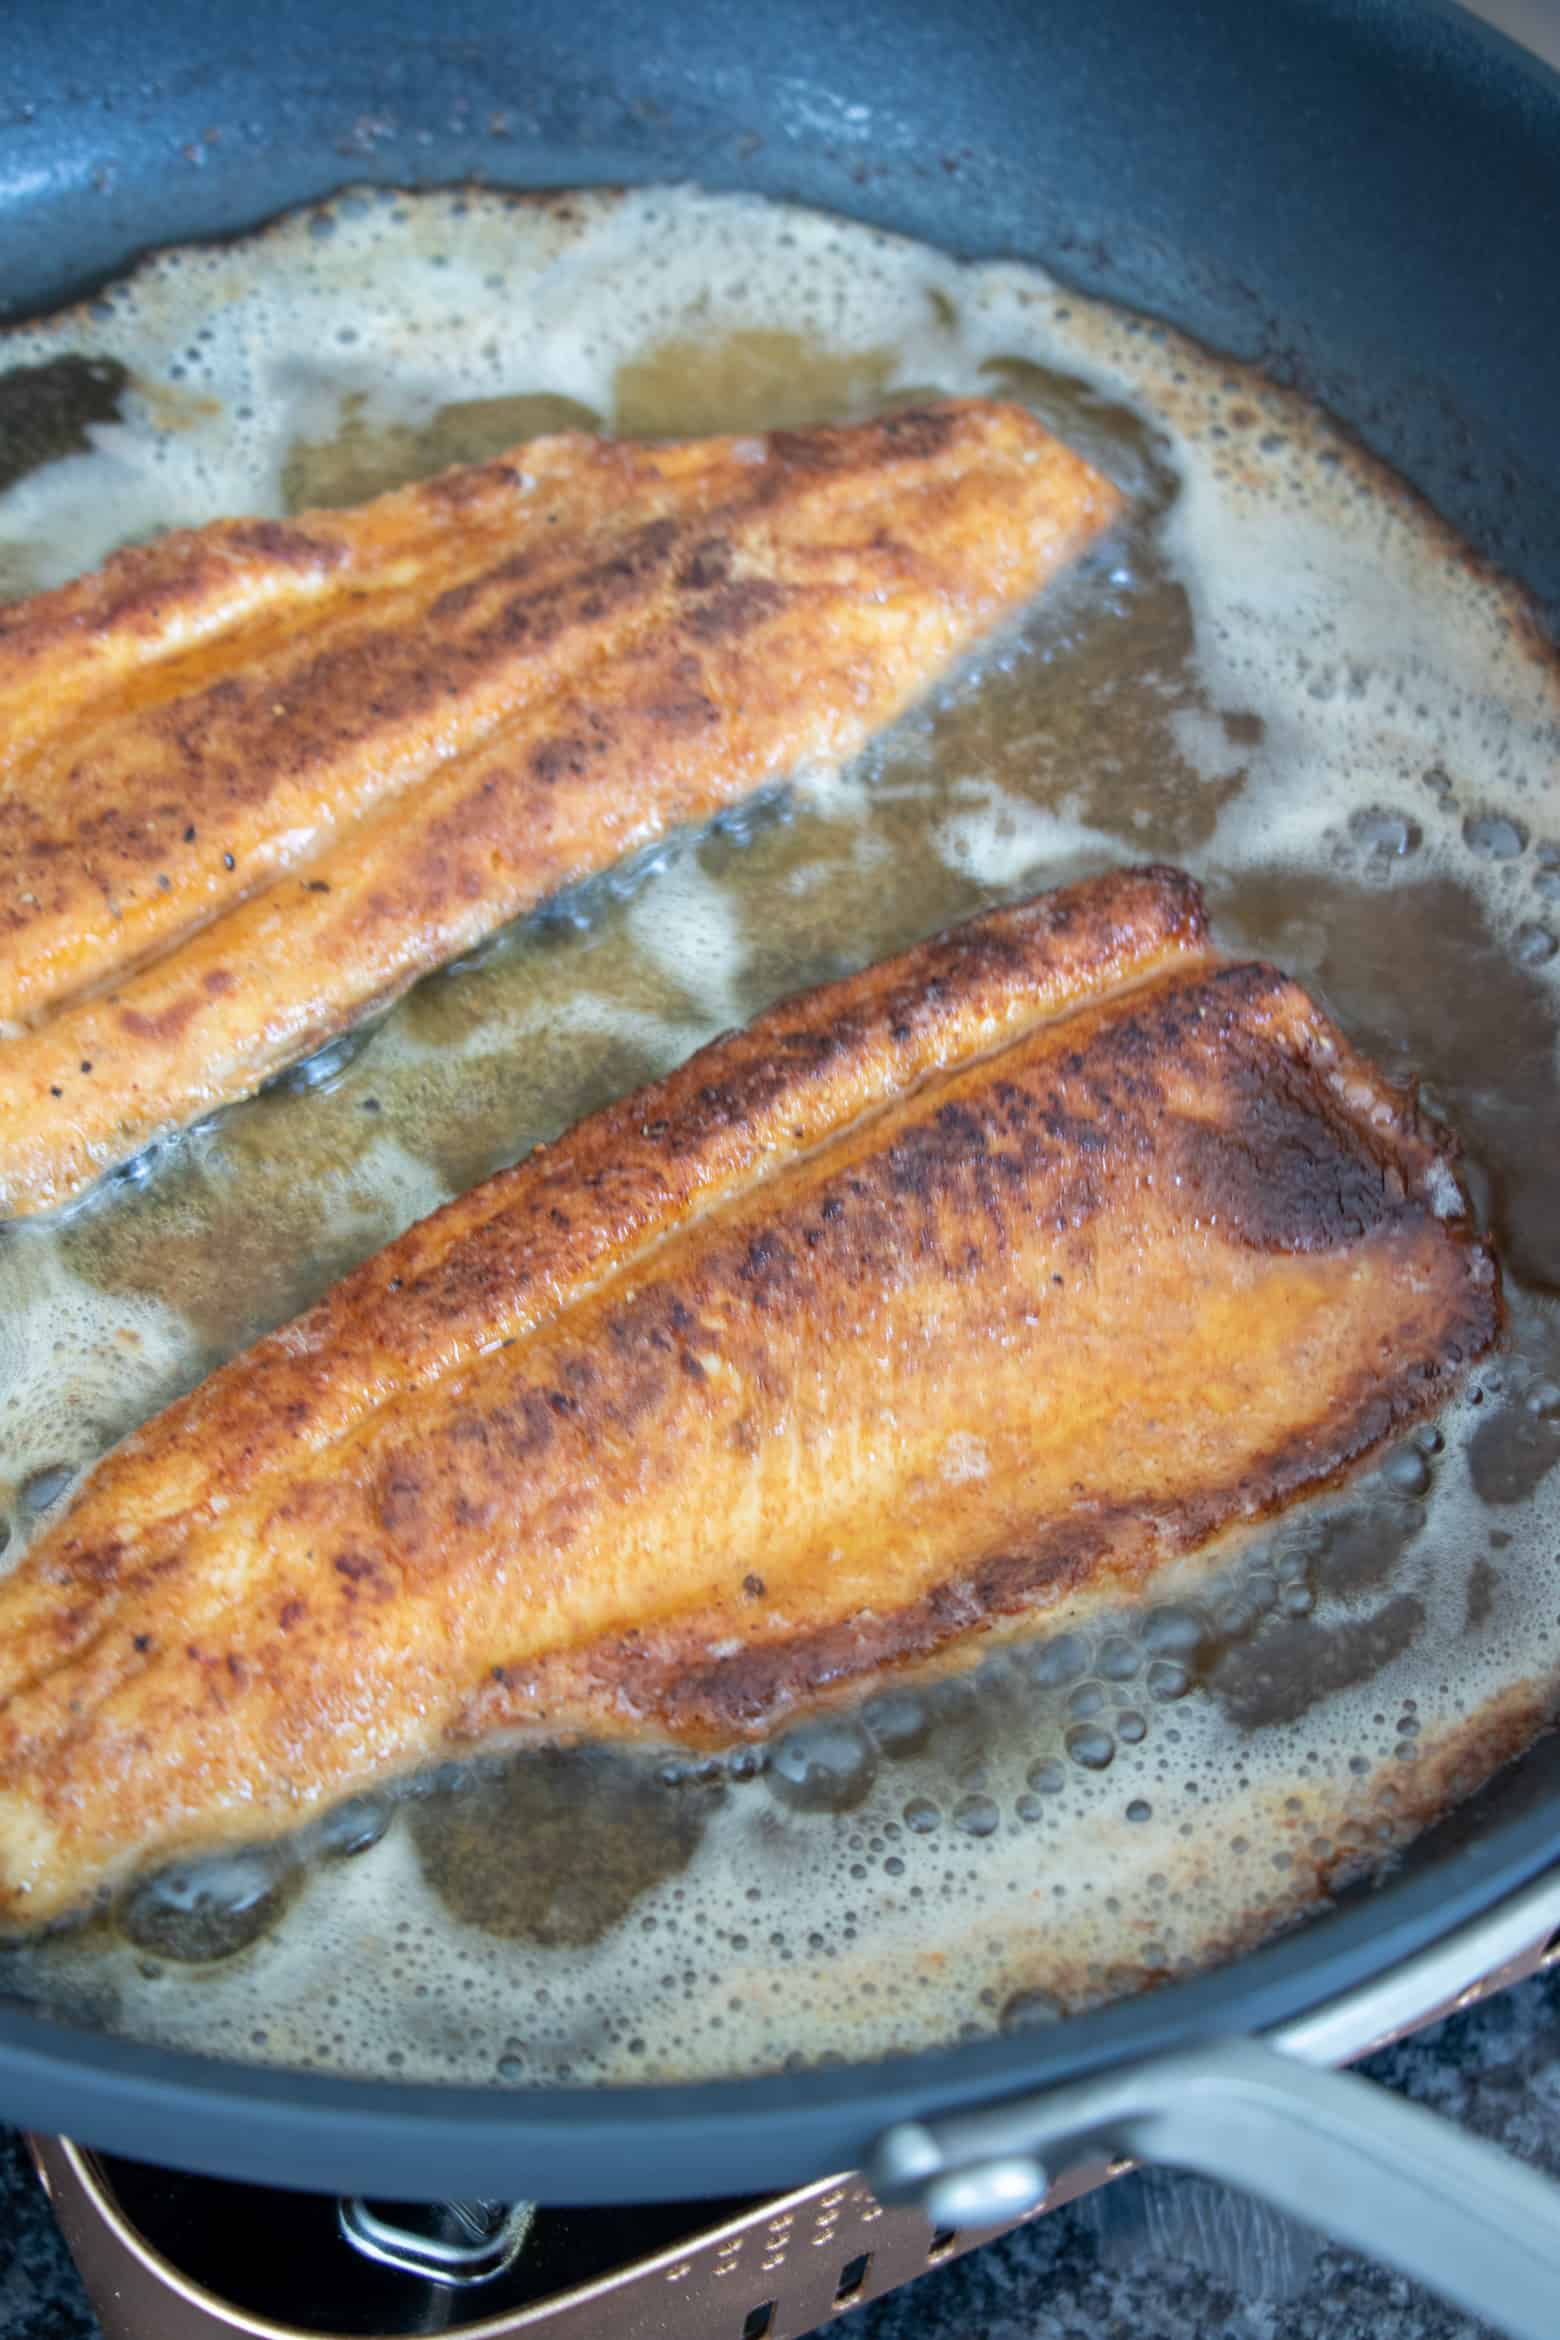 Trout fillets cooking in a skillet.